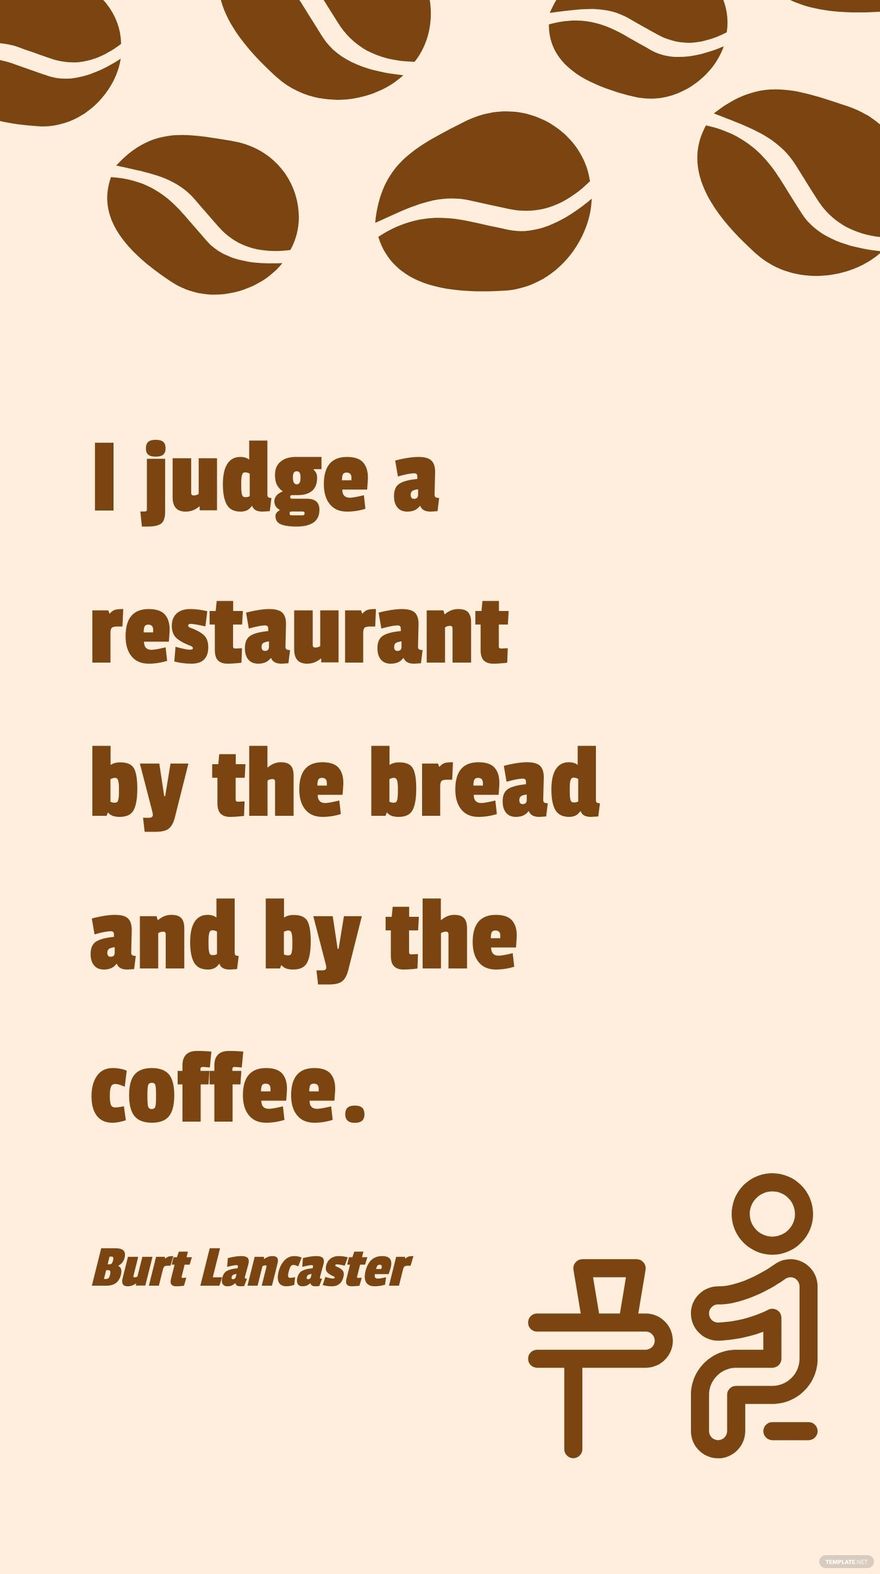 Burt Lancaster - I judge a restaurant by the bread and by the coffee. in JPG